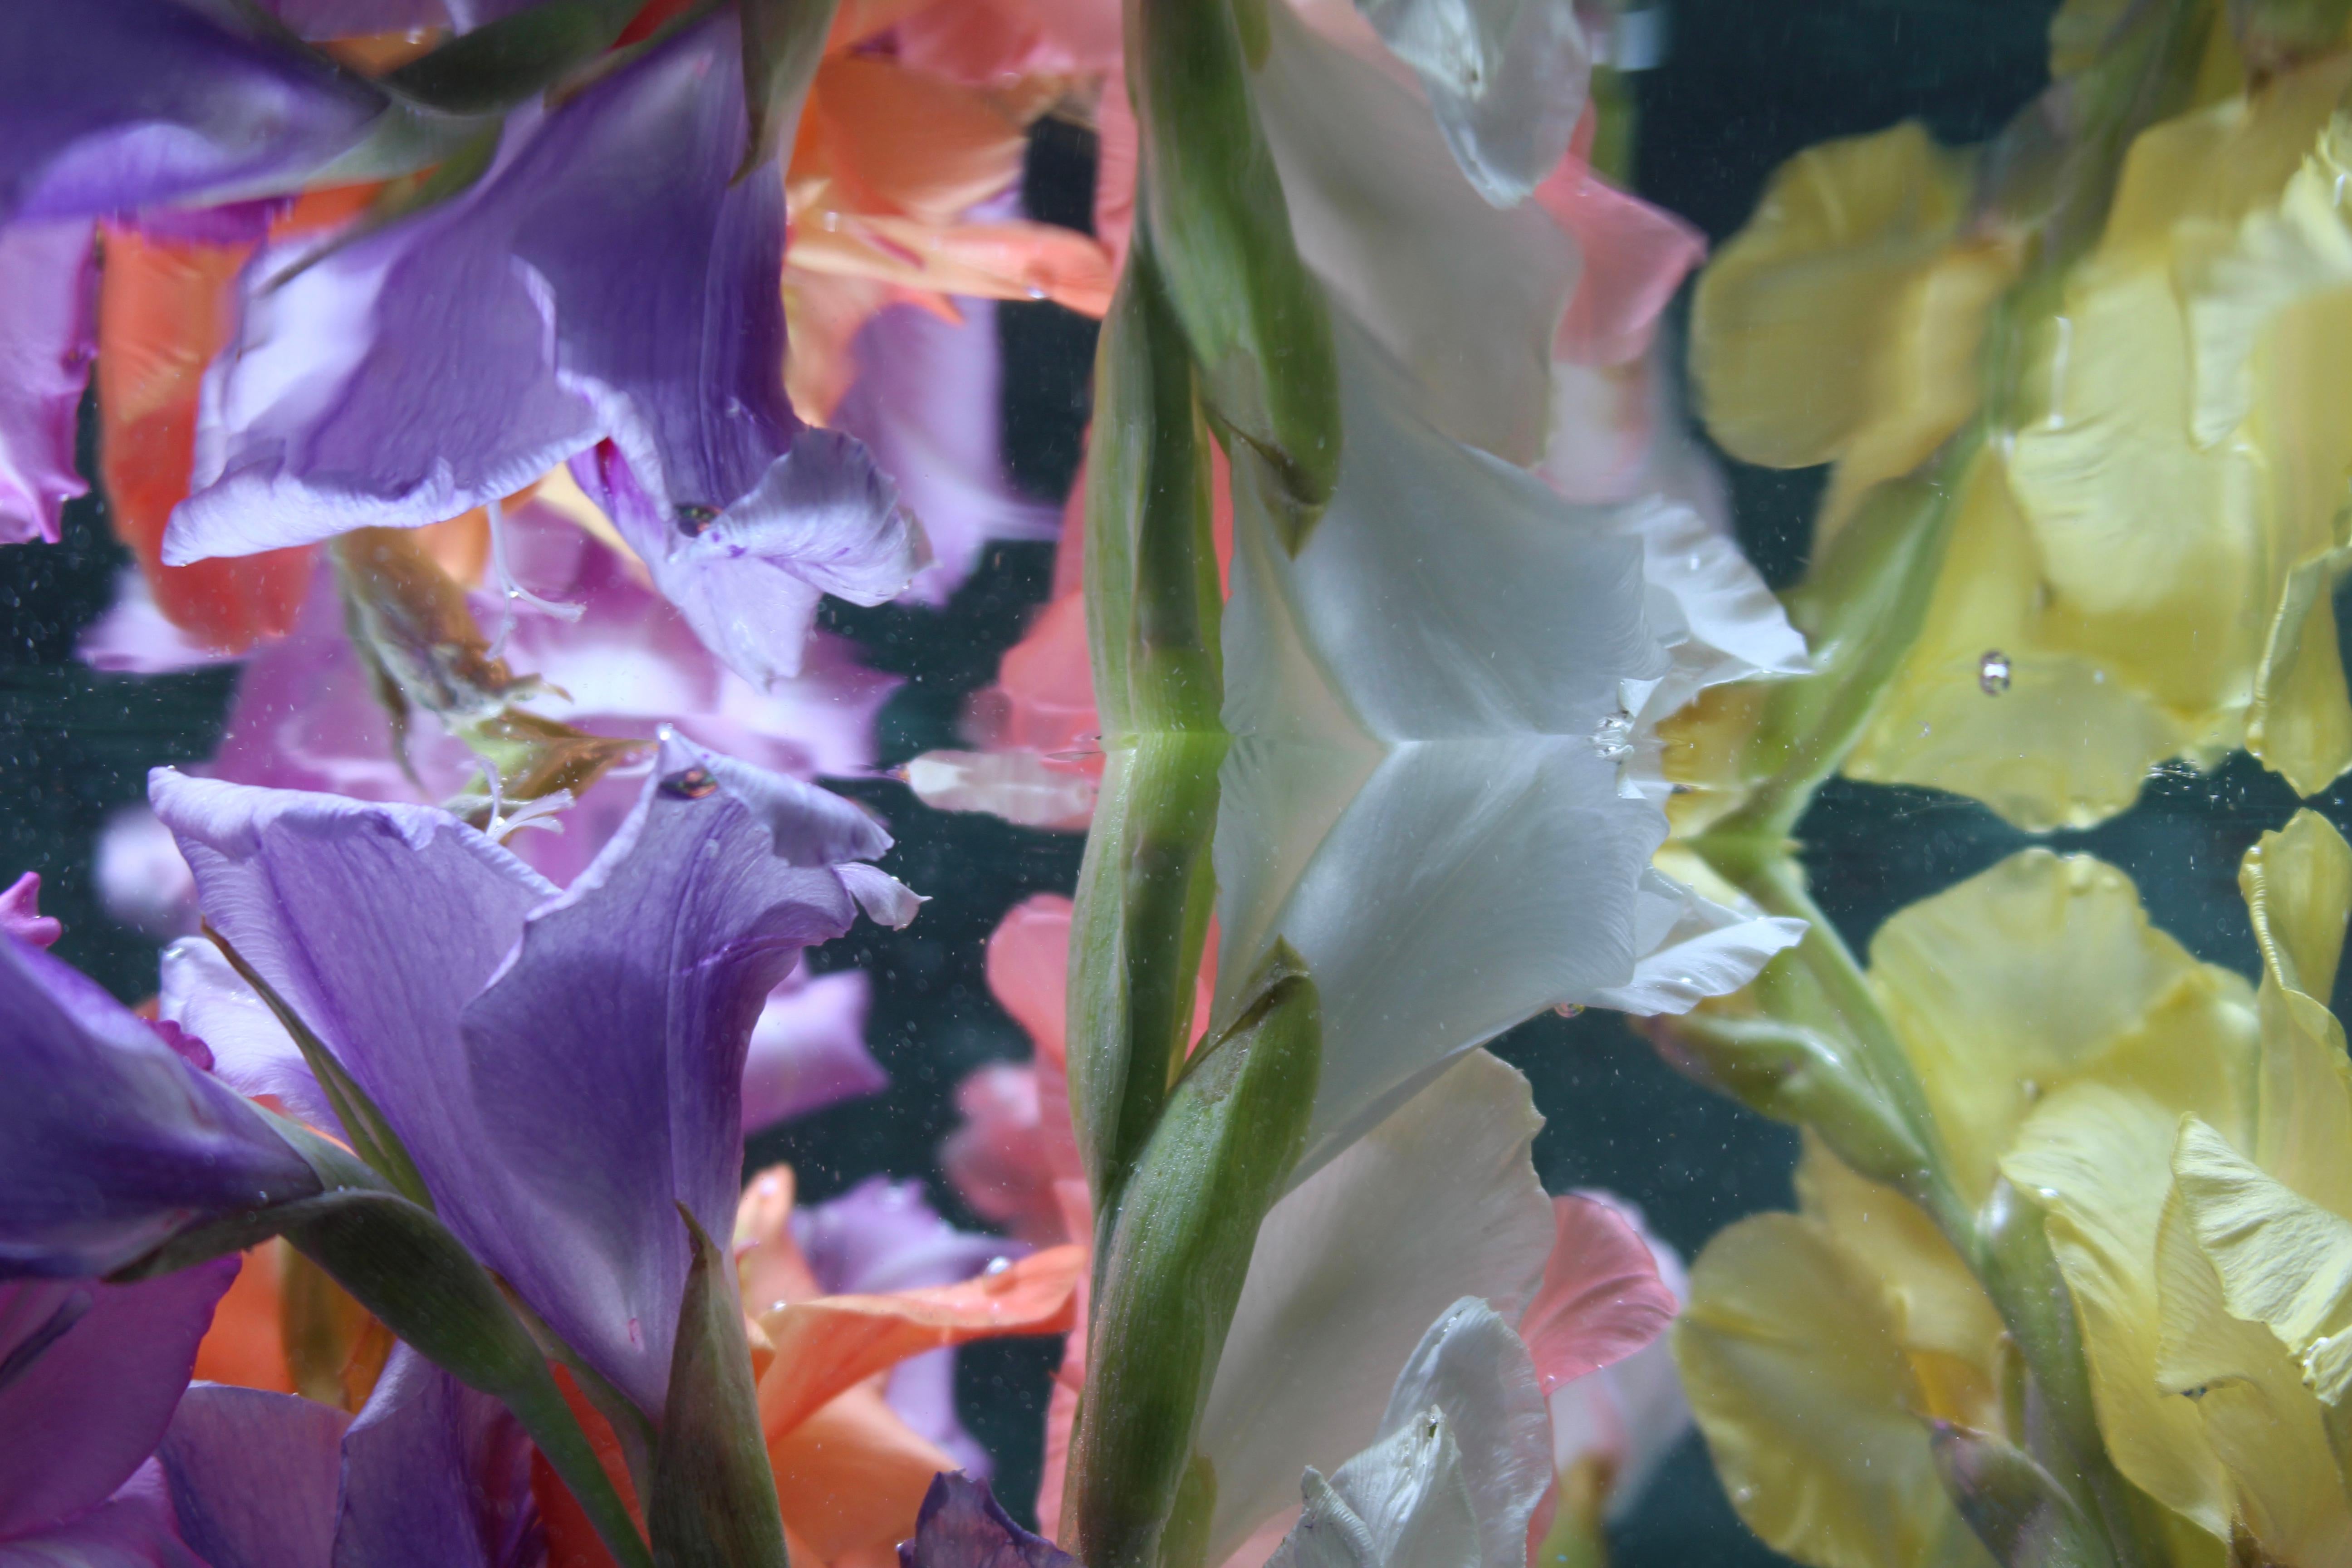 Andrea Bonfils - Submerged Garden 7888, Photography 2018, Printed After